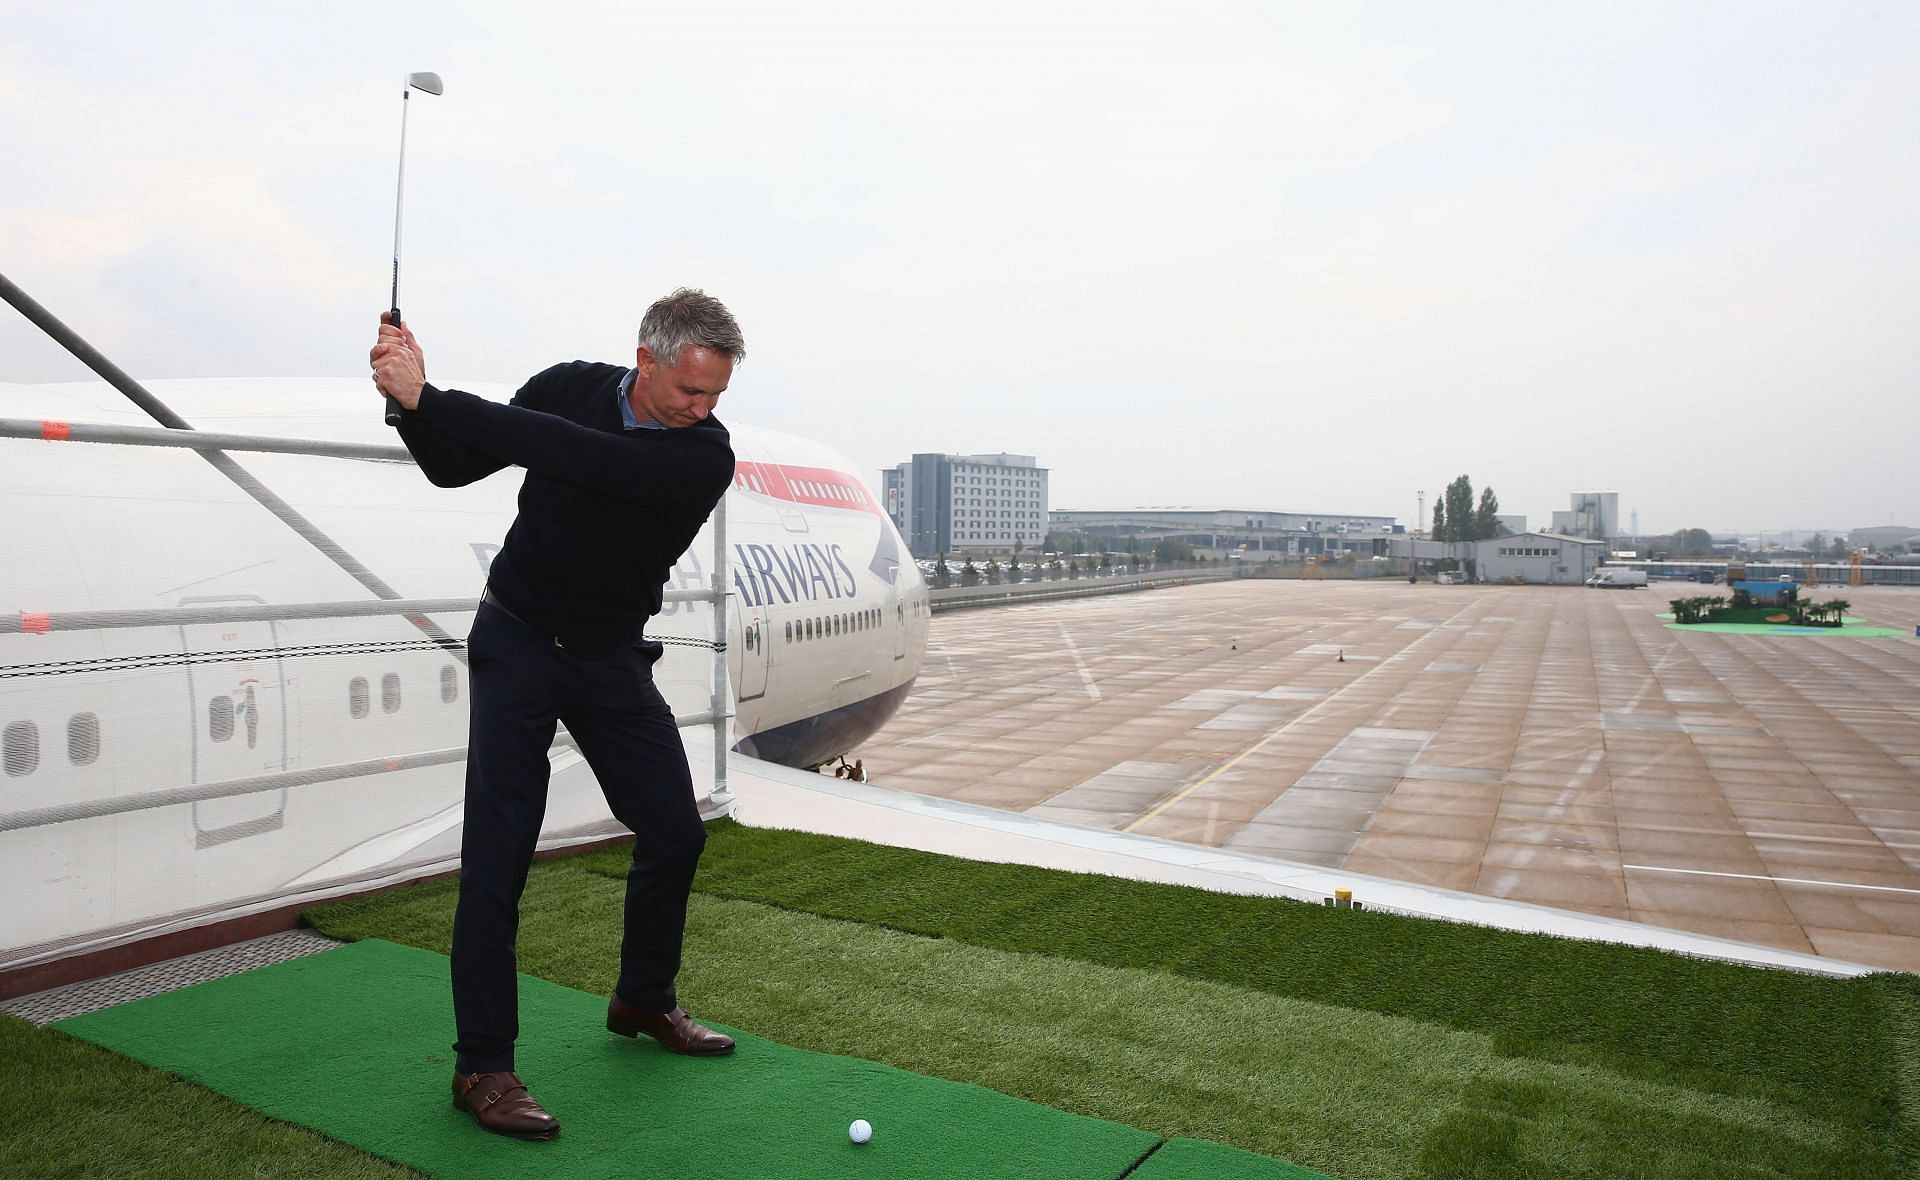 Gary Lineker at the British Airways Stages Golf Challenge on the Wing of a 747 (Image via Ian Walton/Getty Images for British Airways)